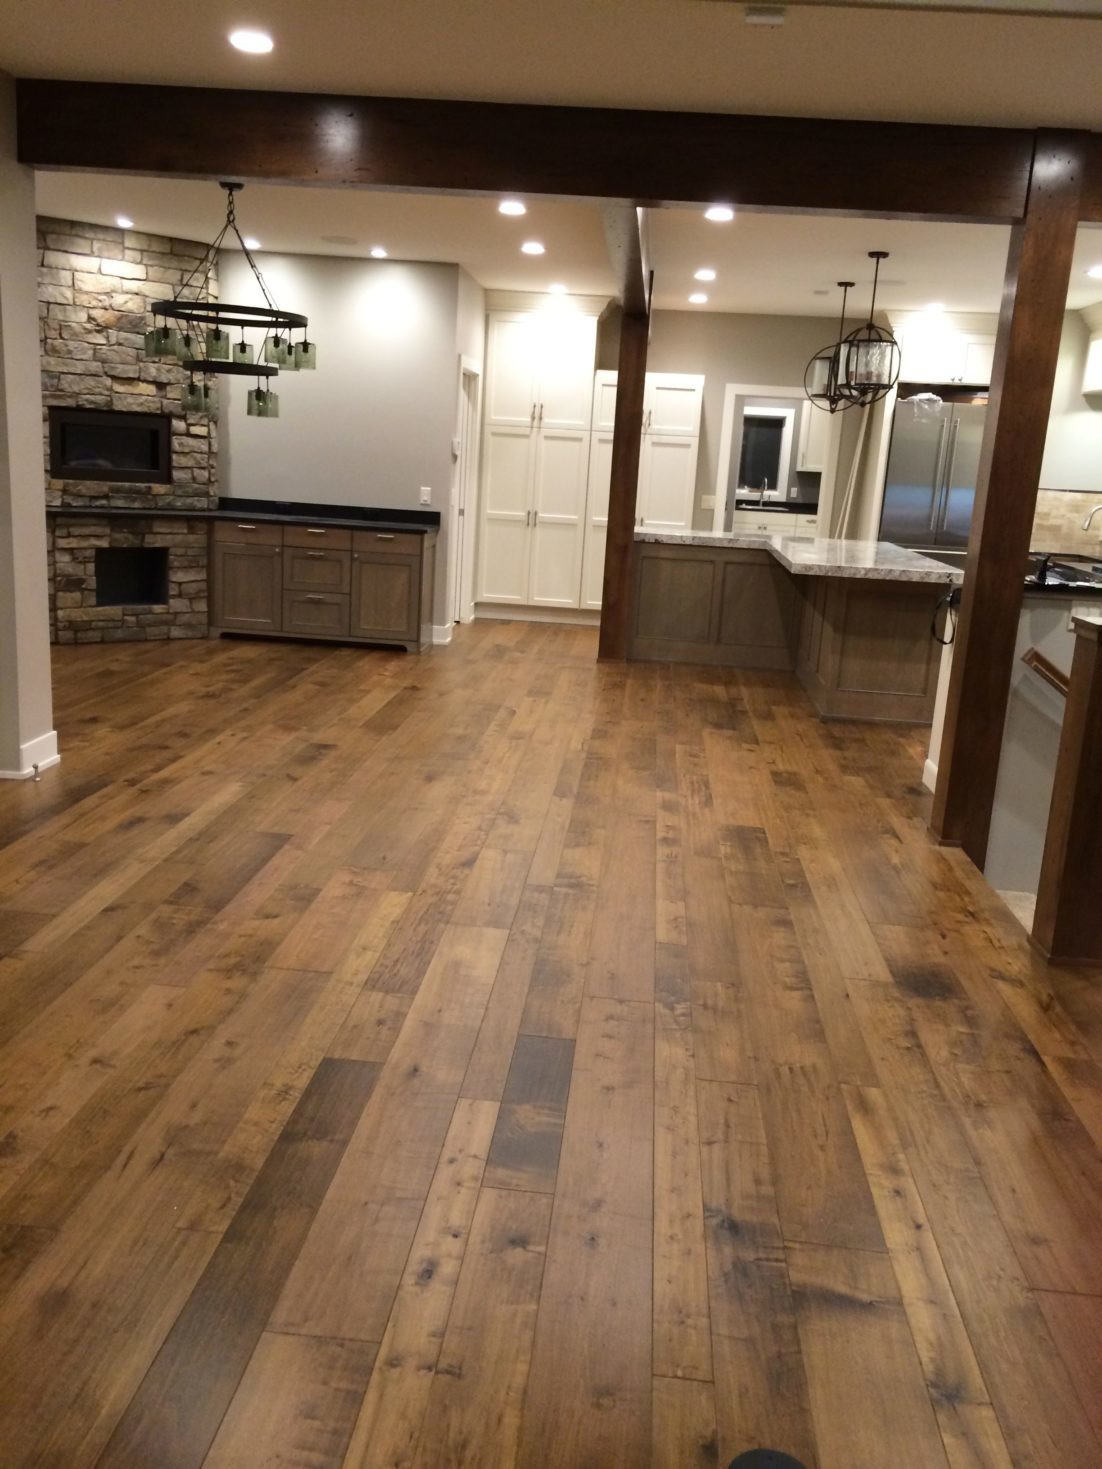 15 Fantastic Hardwood Floor Color with White Cabinets 2024 free download hardwood floor color with white cabinets of white kitchen ideas 2018 small kitchens 2017 cabinets stainless regarding large size of kitchenwhite kitchen ideas 2018 small kitchens 2017 cabine